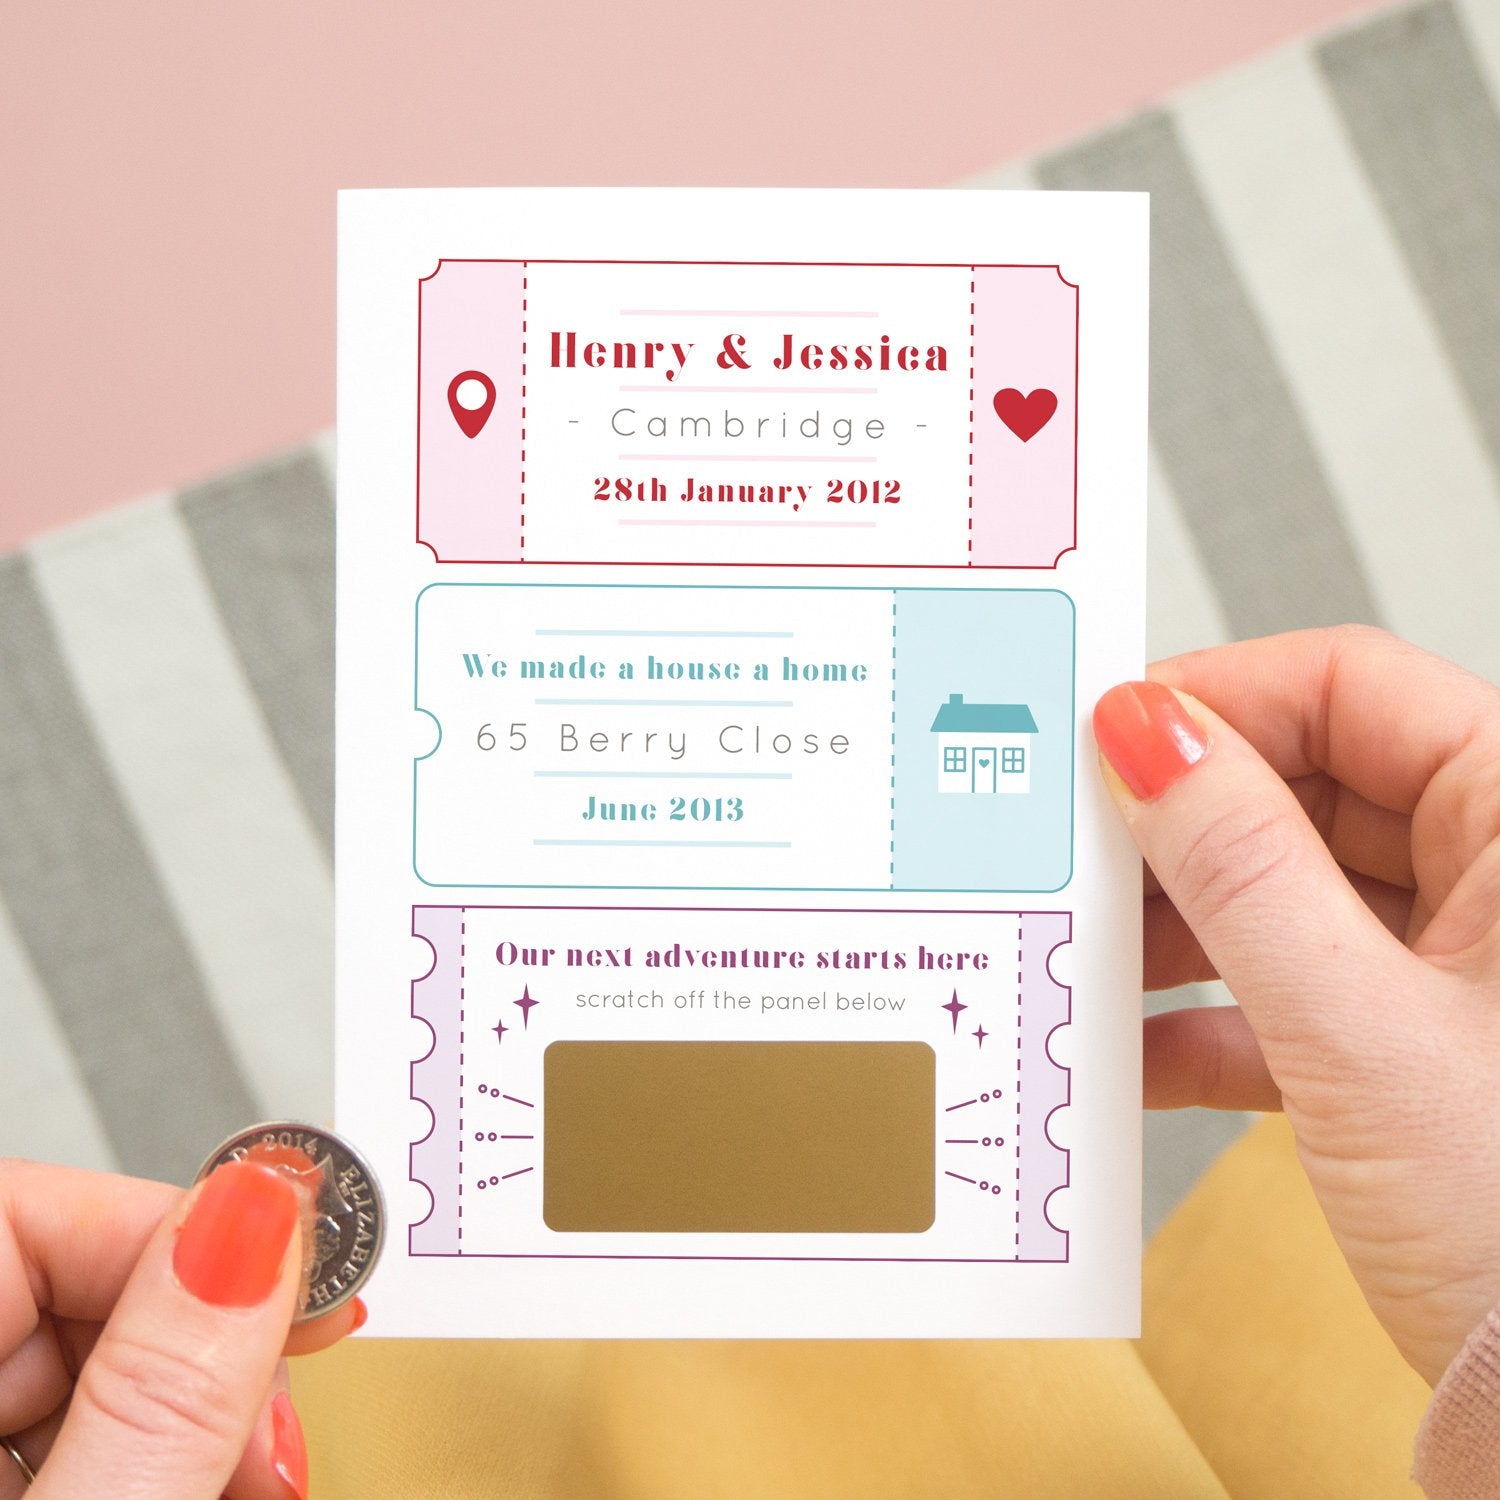 A personalised baby due date announcement card by Joanne Hawker featuring life special milestones! The baby due date announcement is hidden by a gold panel before it is scratched off.